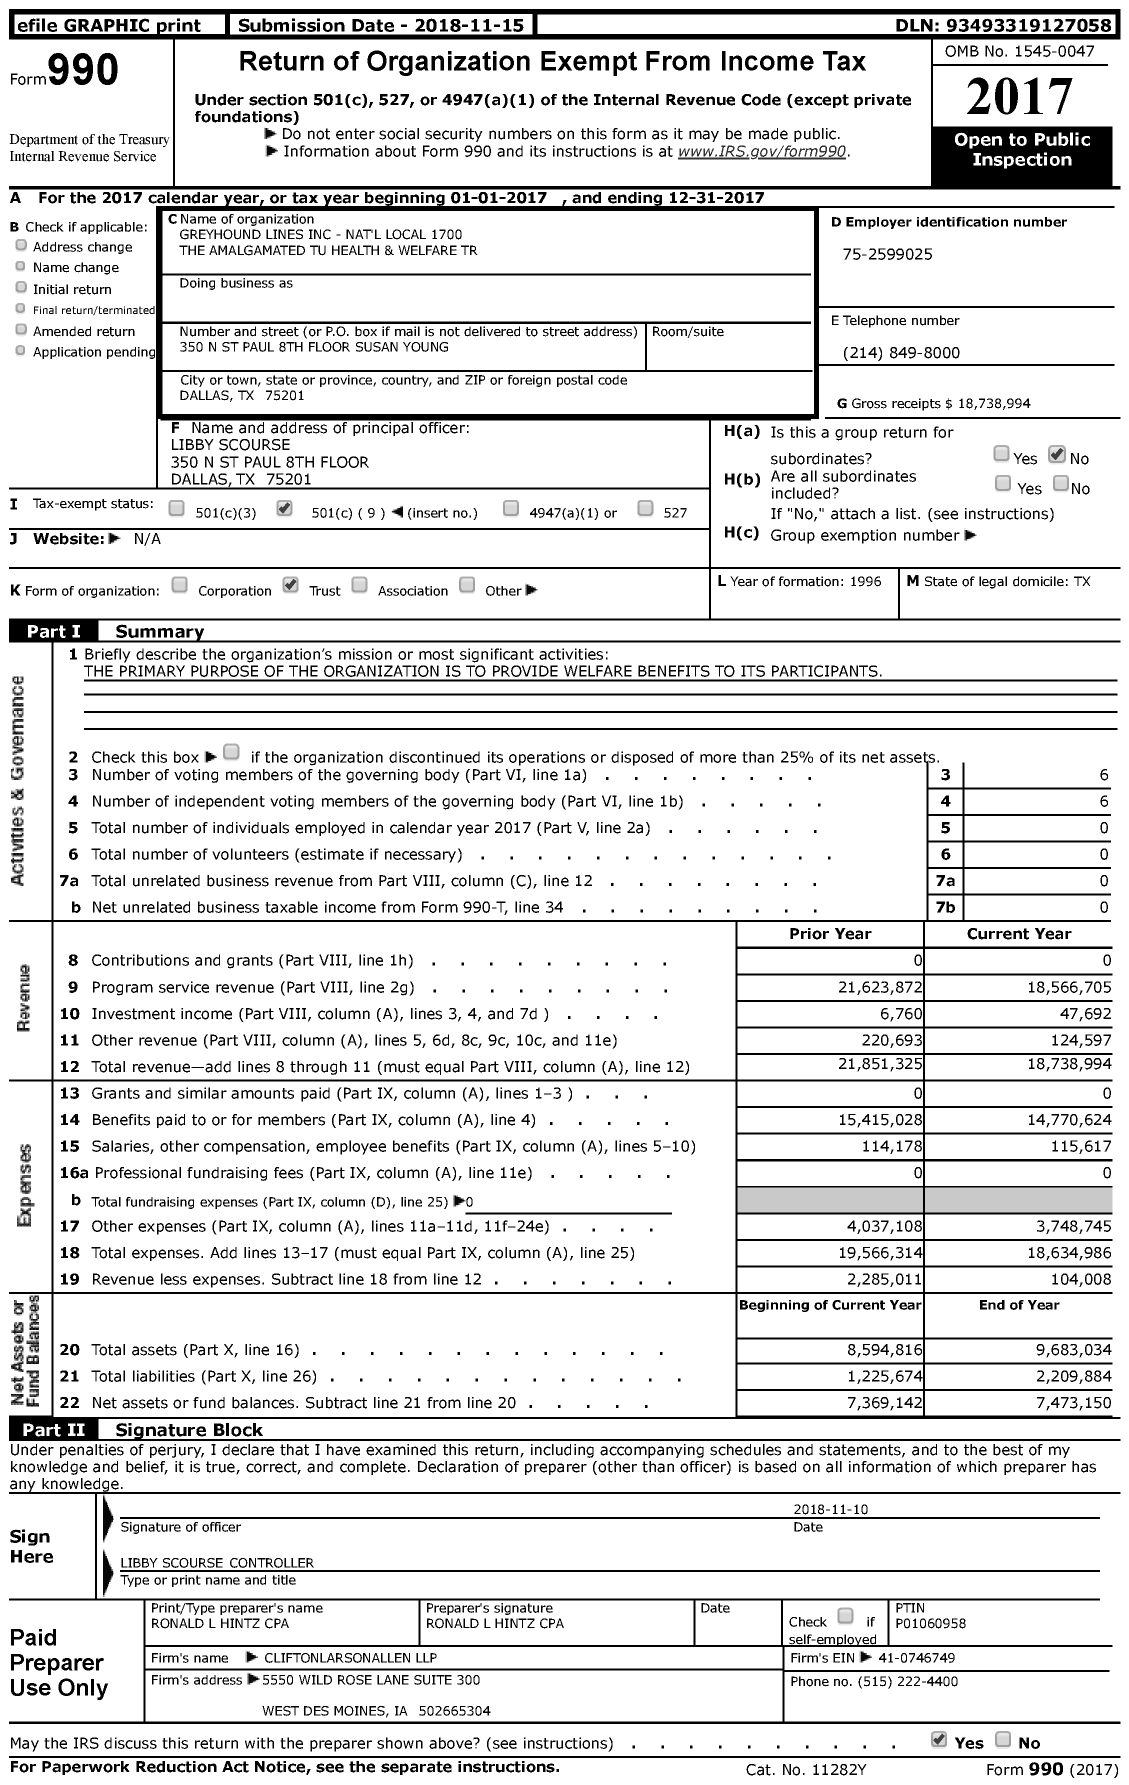 Image of first page of 2017 Form 990 for Greyhound Lines - Nat'l Local 1700 the Amalgamated Tu Health and Welfare Trust